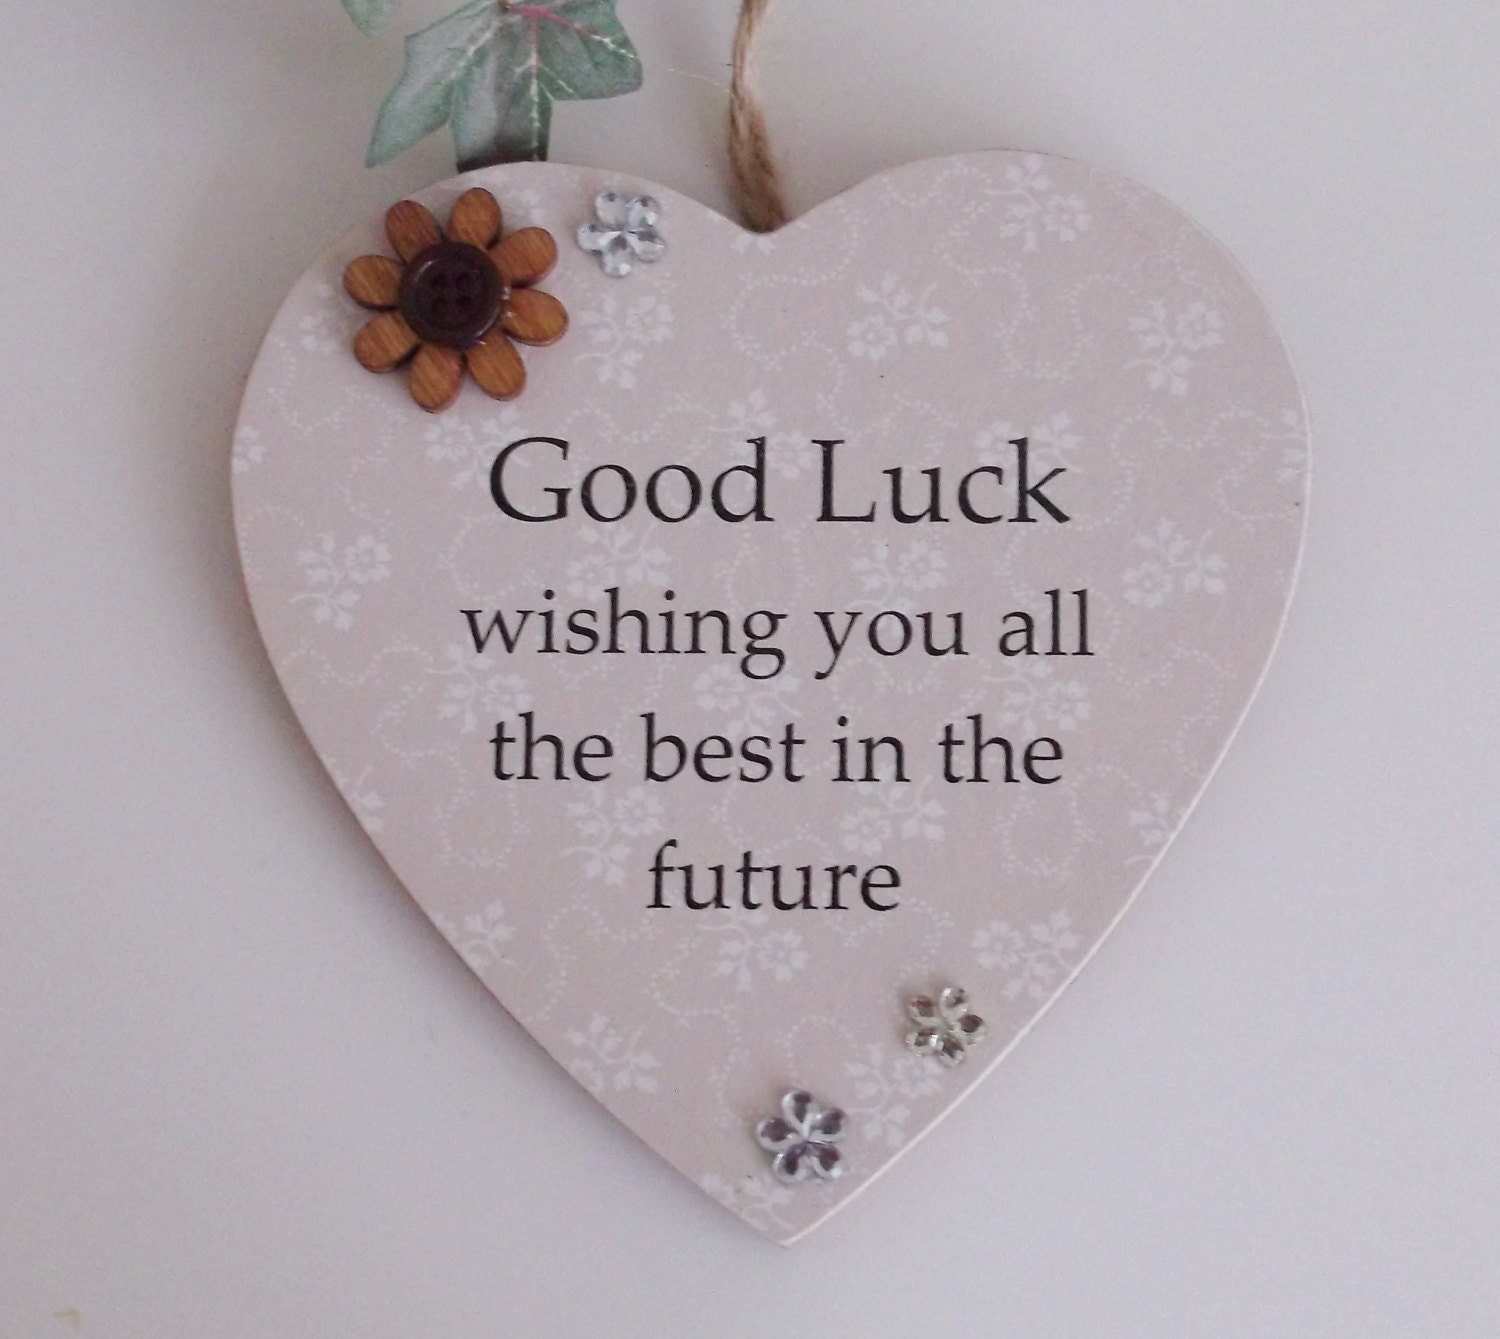 Good Luck wishing you all the best in the future Gift Plaque | Etsy